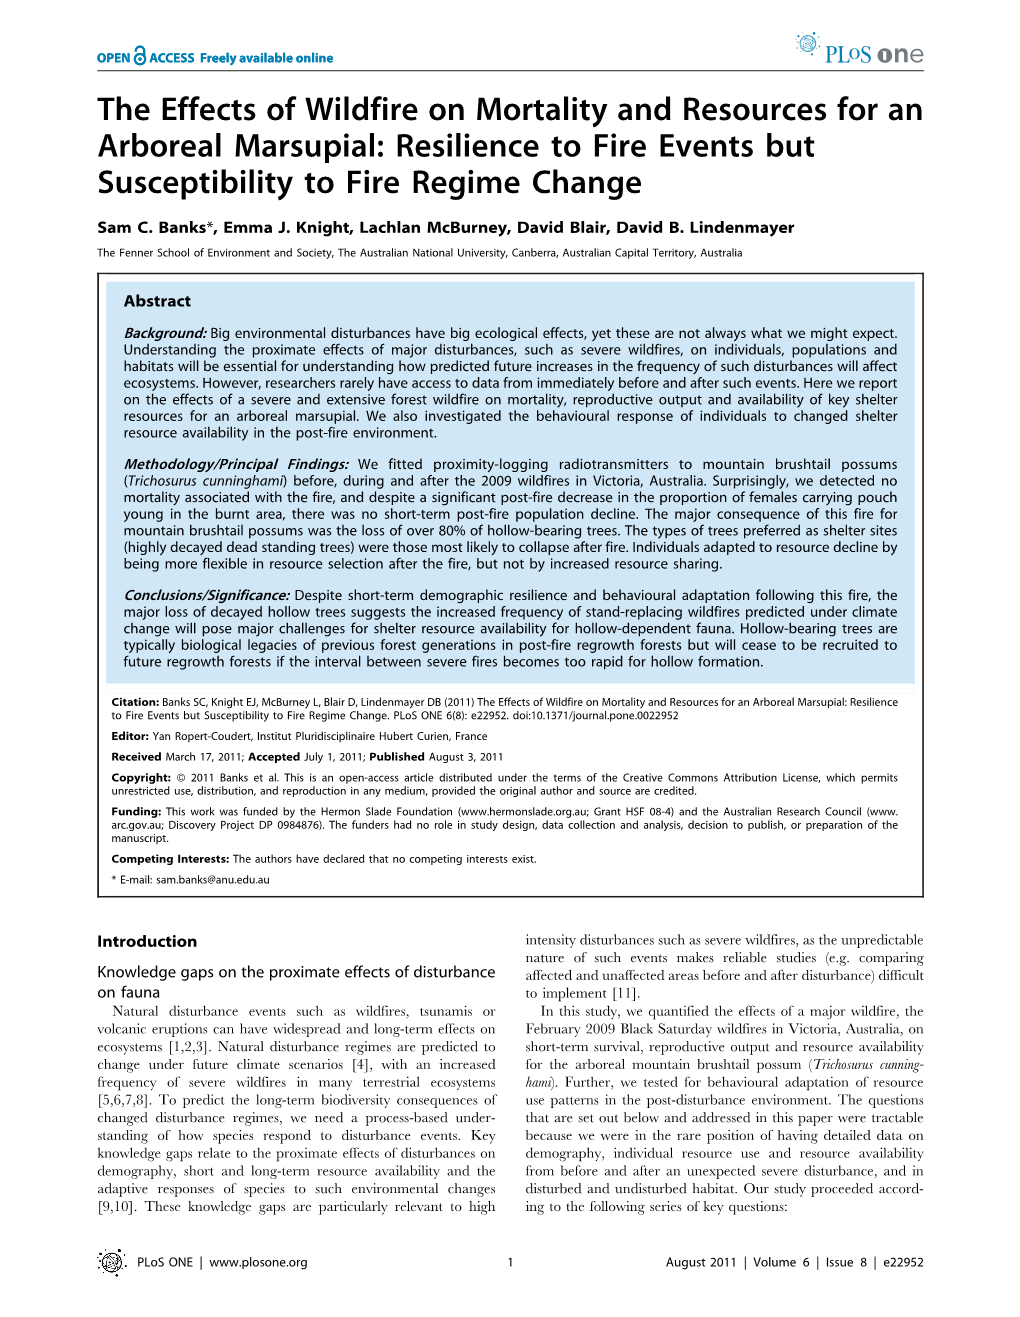 The Effects of Wildfire on Mortality and Resources for an Arboreal Marsupial: Resilience to Fire Events but Susceptibility to Fire Regime Change